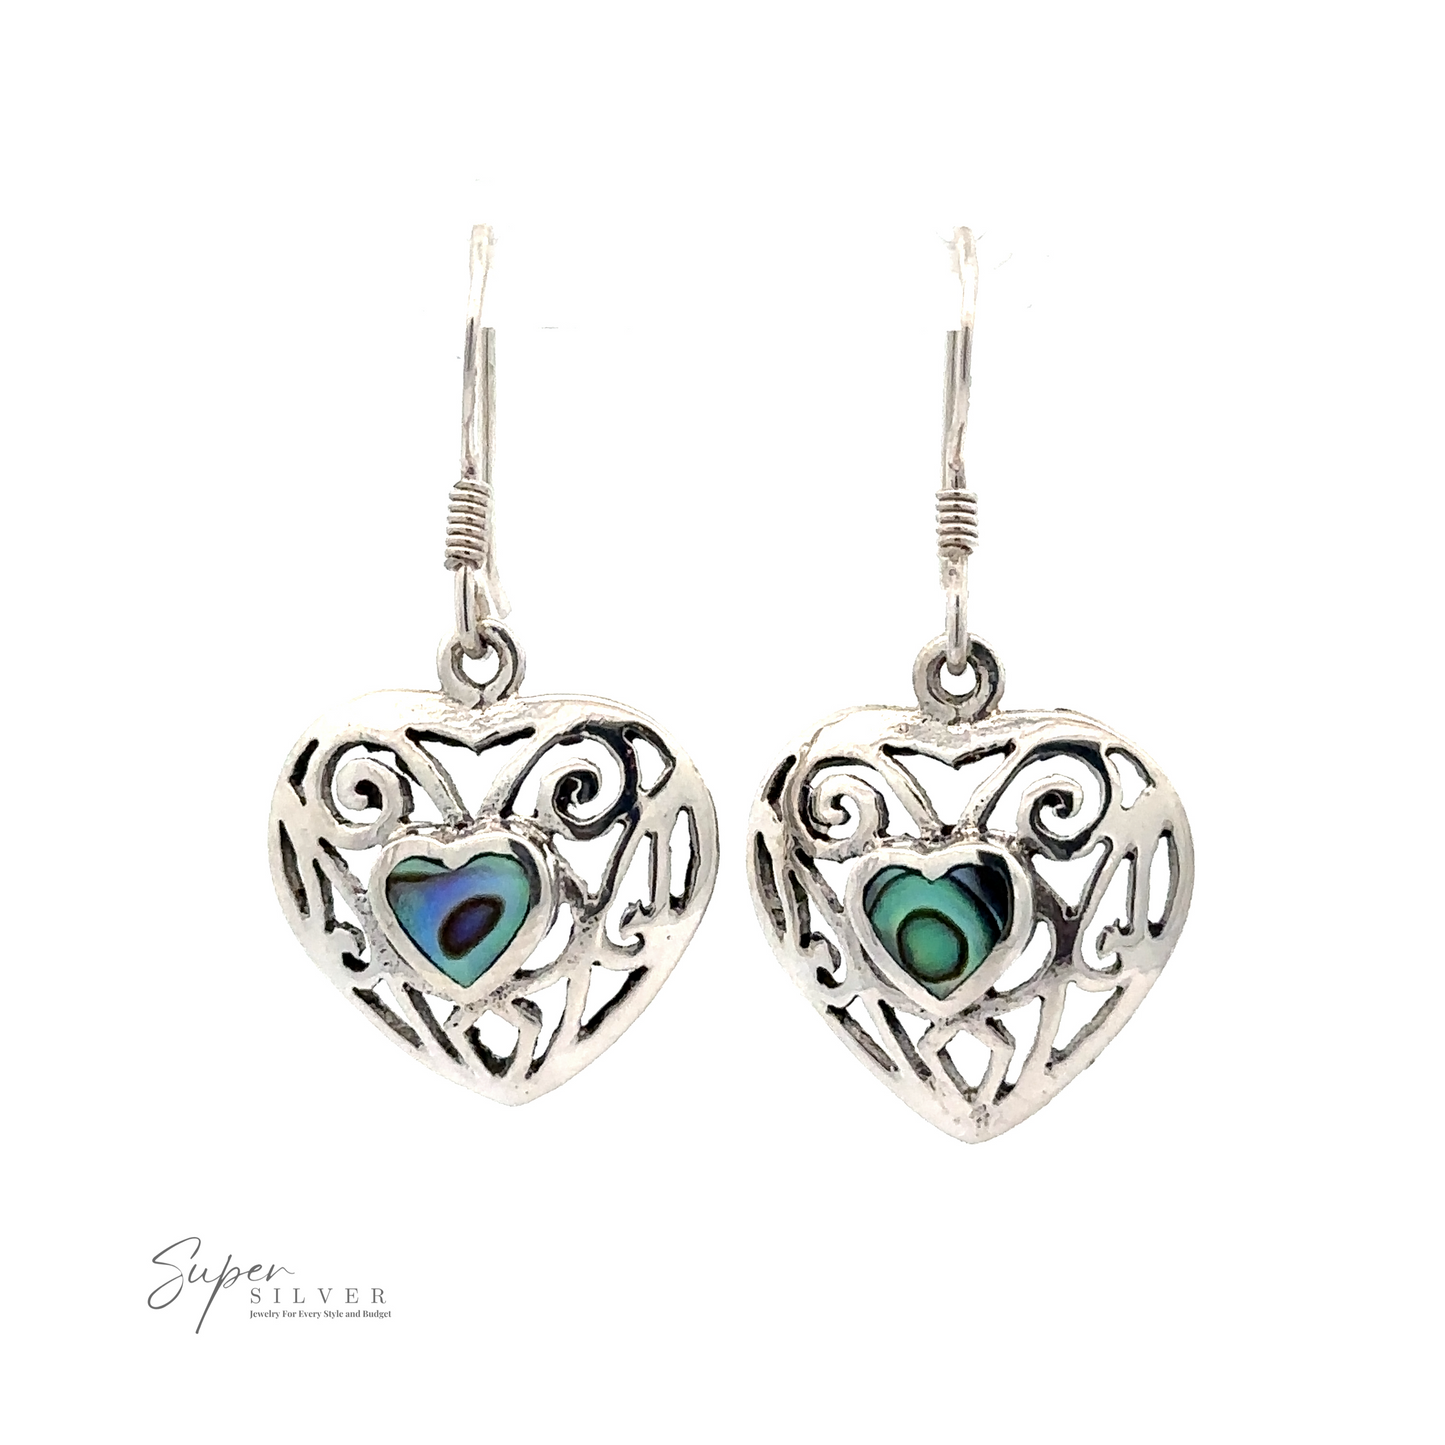 Silver heart-shaped earrings with intricate designs, featuring small iridescent heart-shaped Abalone inlays at the center. The name "Elegant Heart Shaped Abalone Earrings" is visible in the bottom left corner.